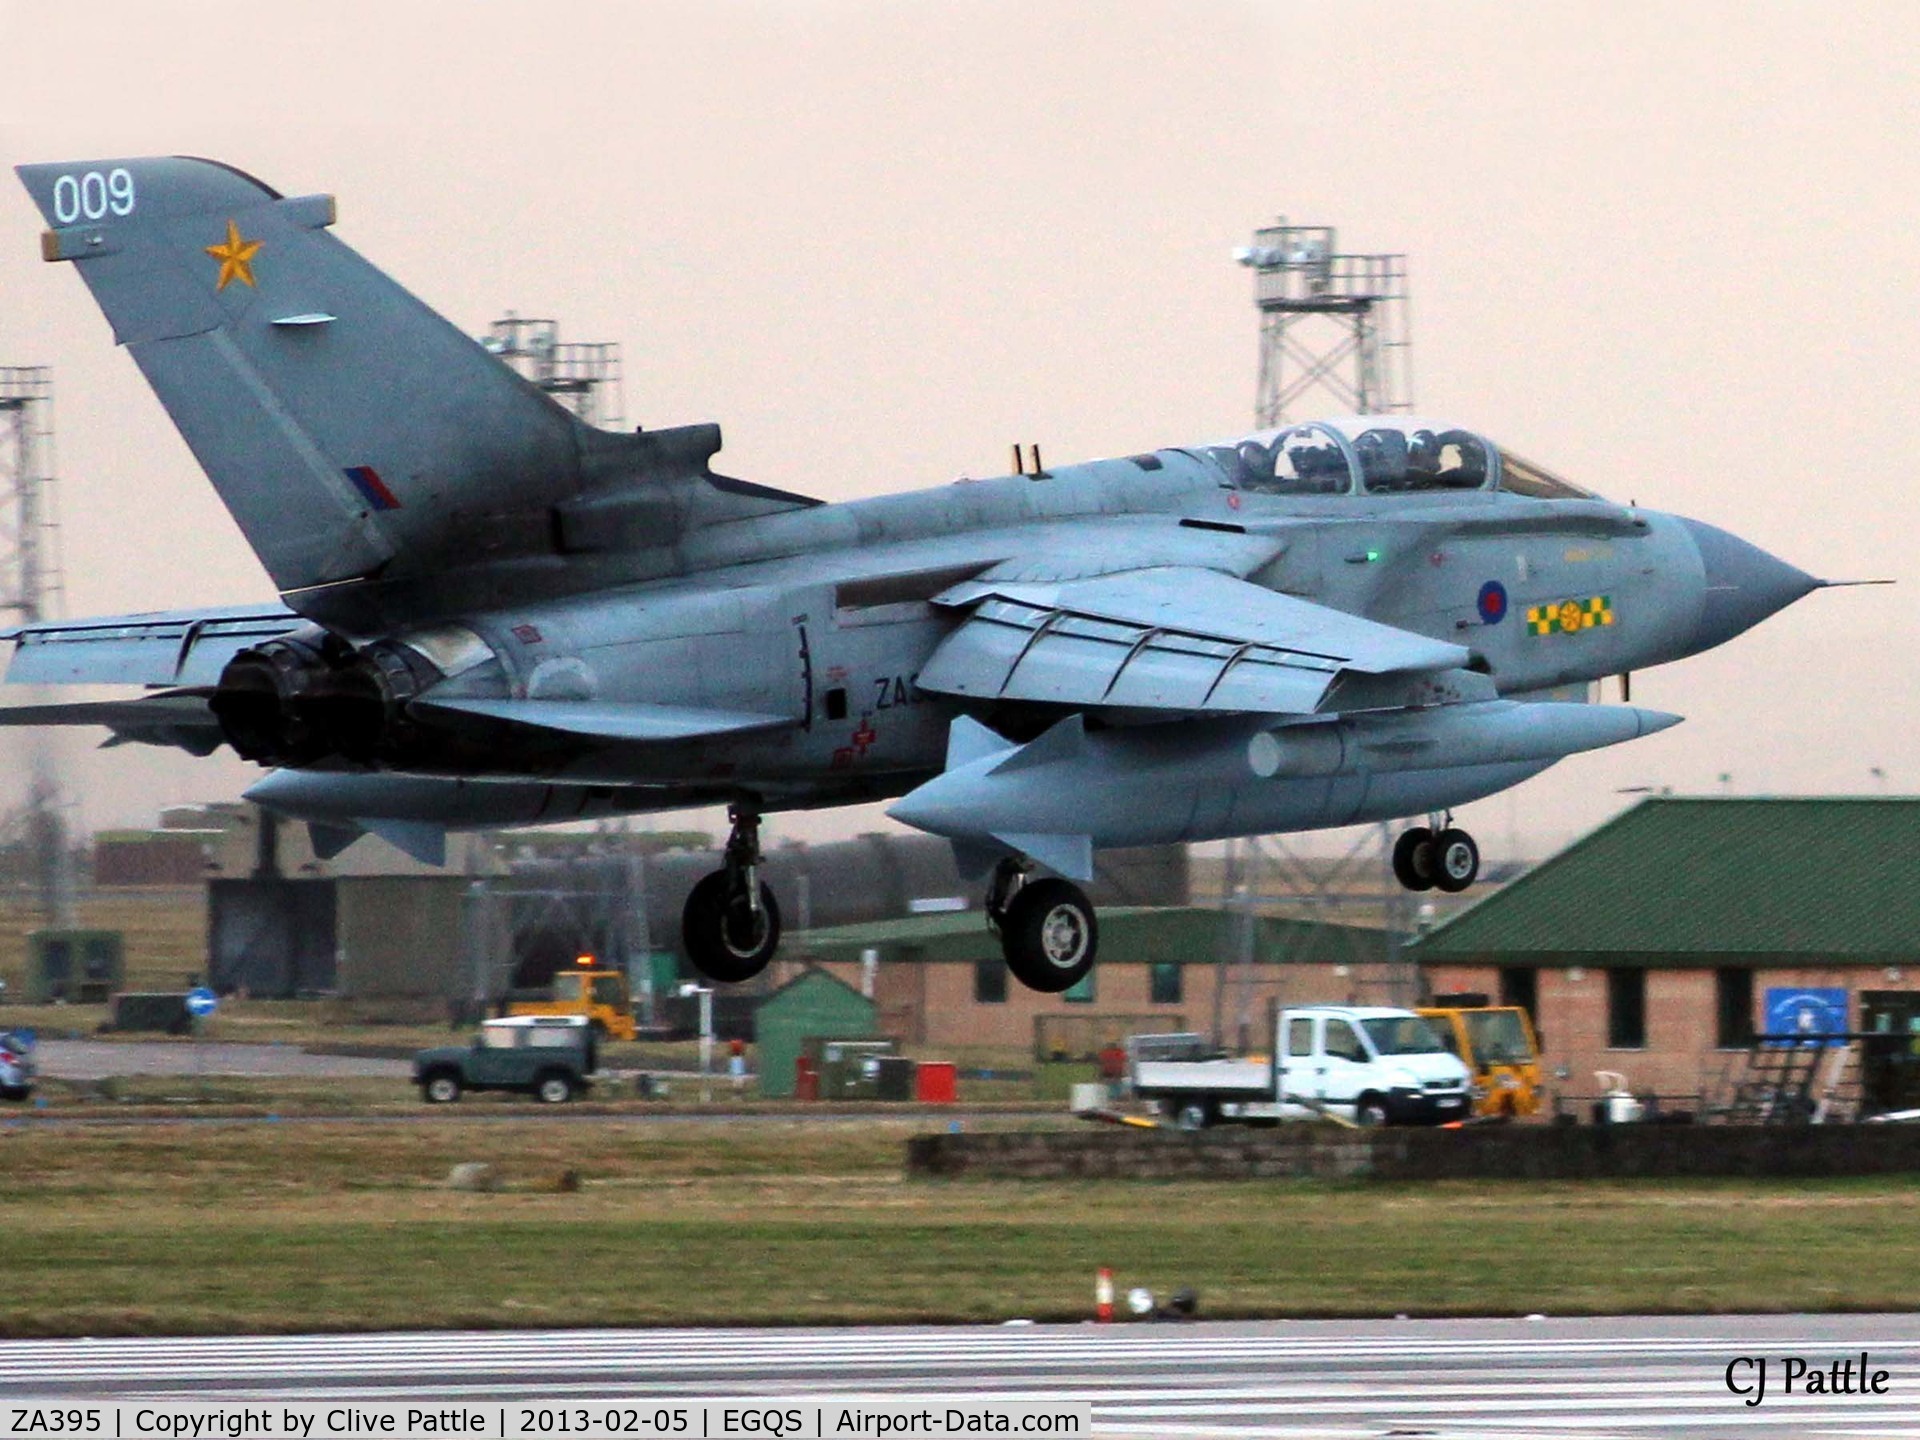 ZA395, 1982 Panavia Tornado GR.4A C/N 192/BS062/3094, ZA395 coded 009 about to land at RAF Lossiemouth EGQS